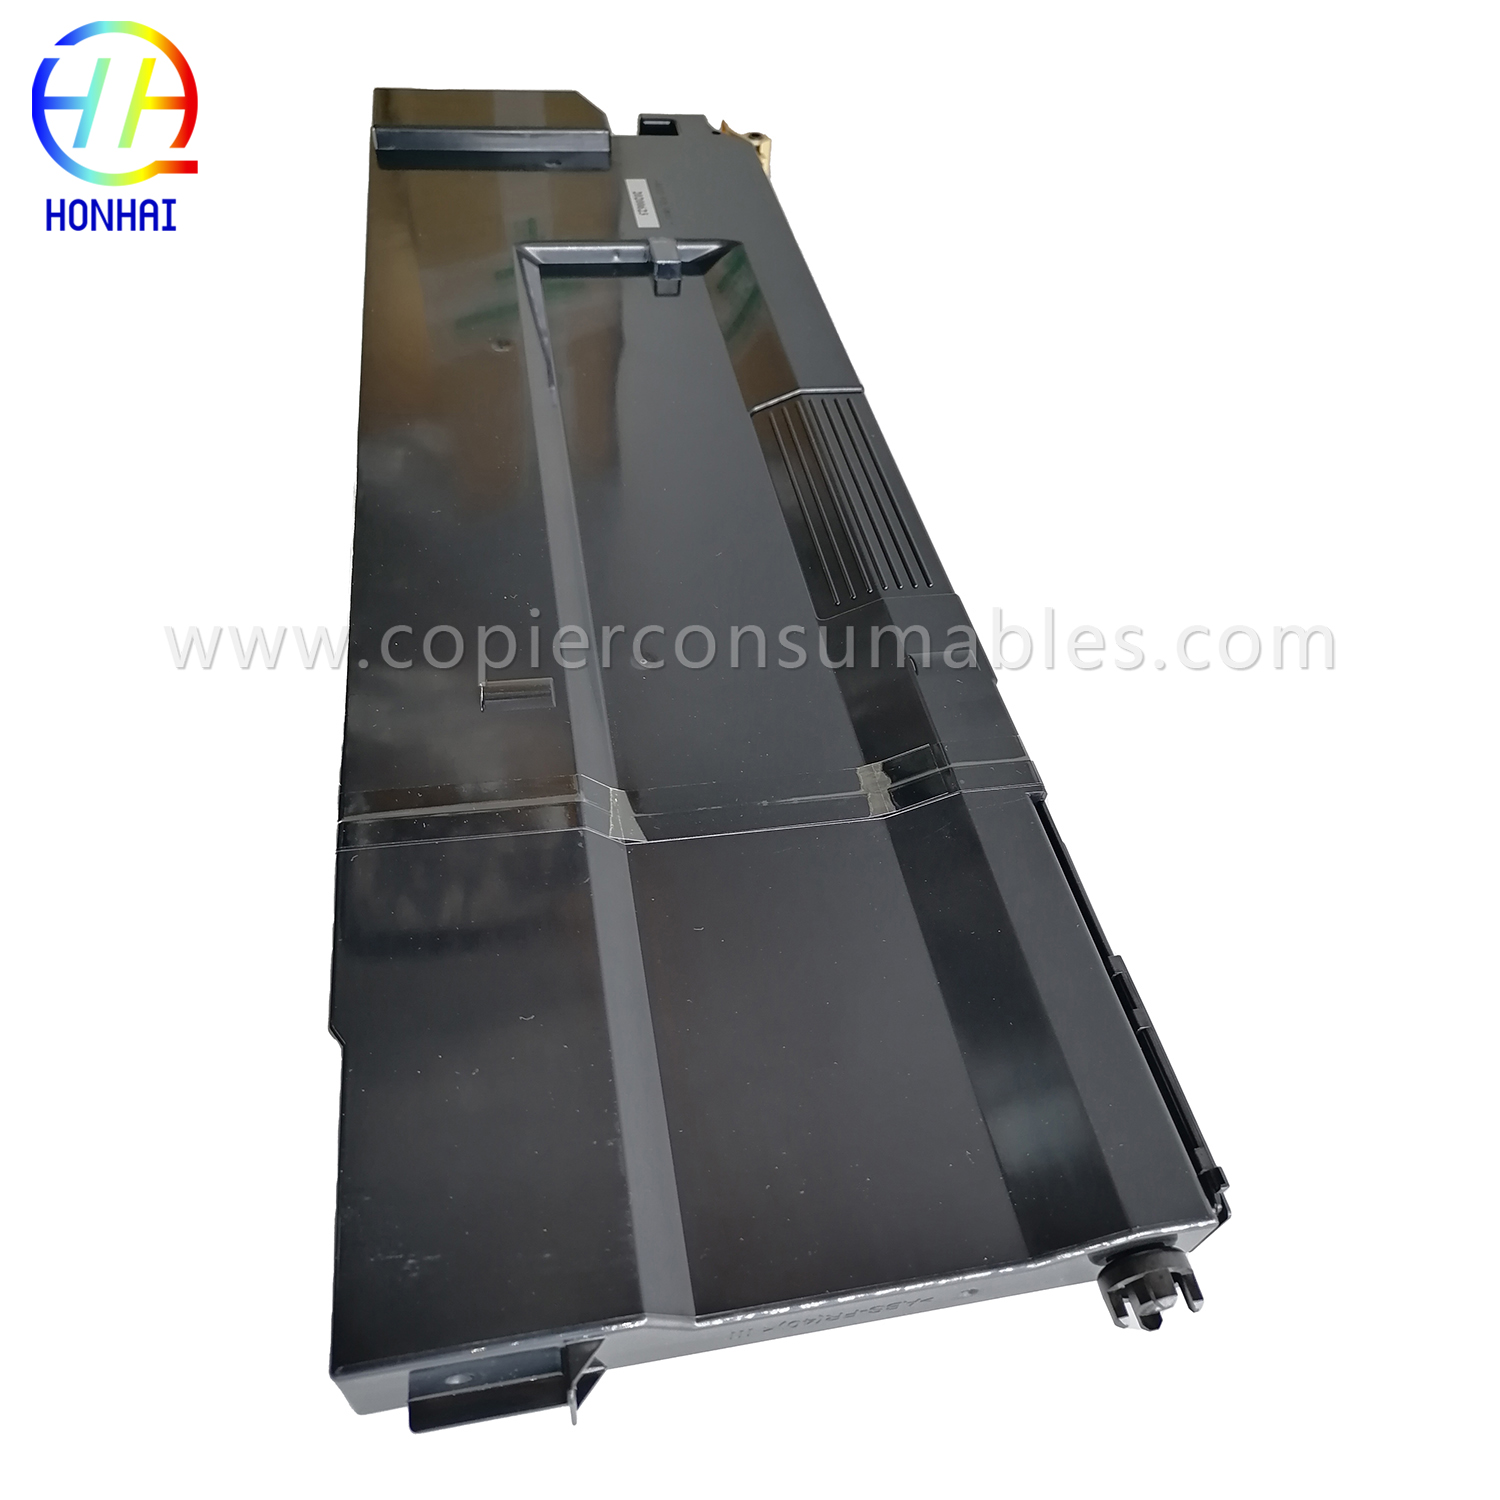 Waste Toner Container for Xerox 4110 4127 4590 4595 D110 D125 D136 D95 ED125 ED95A 008R13036(5) 拷贝